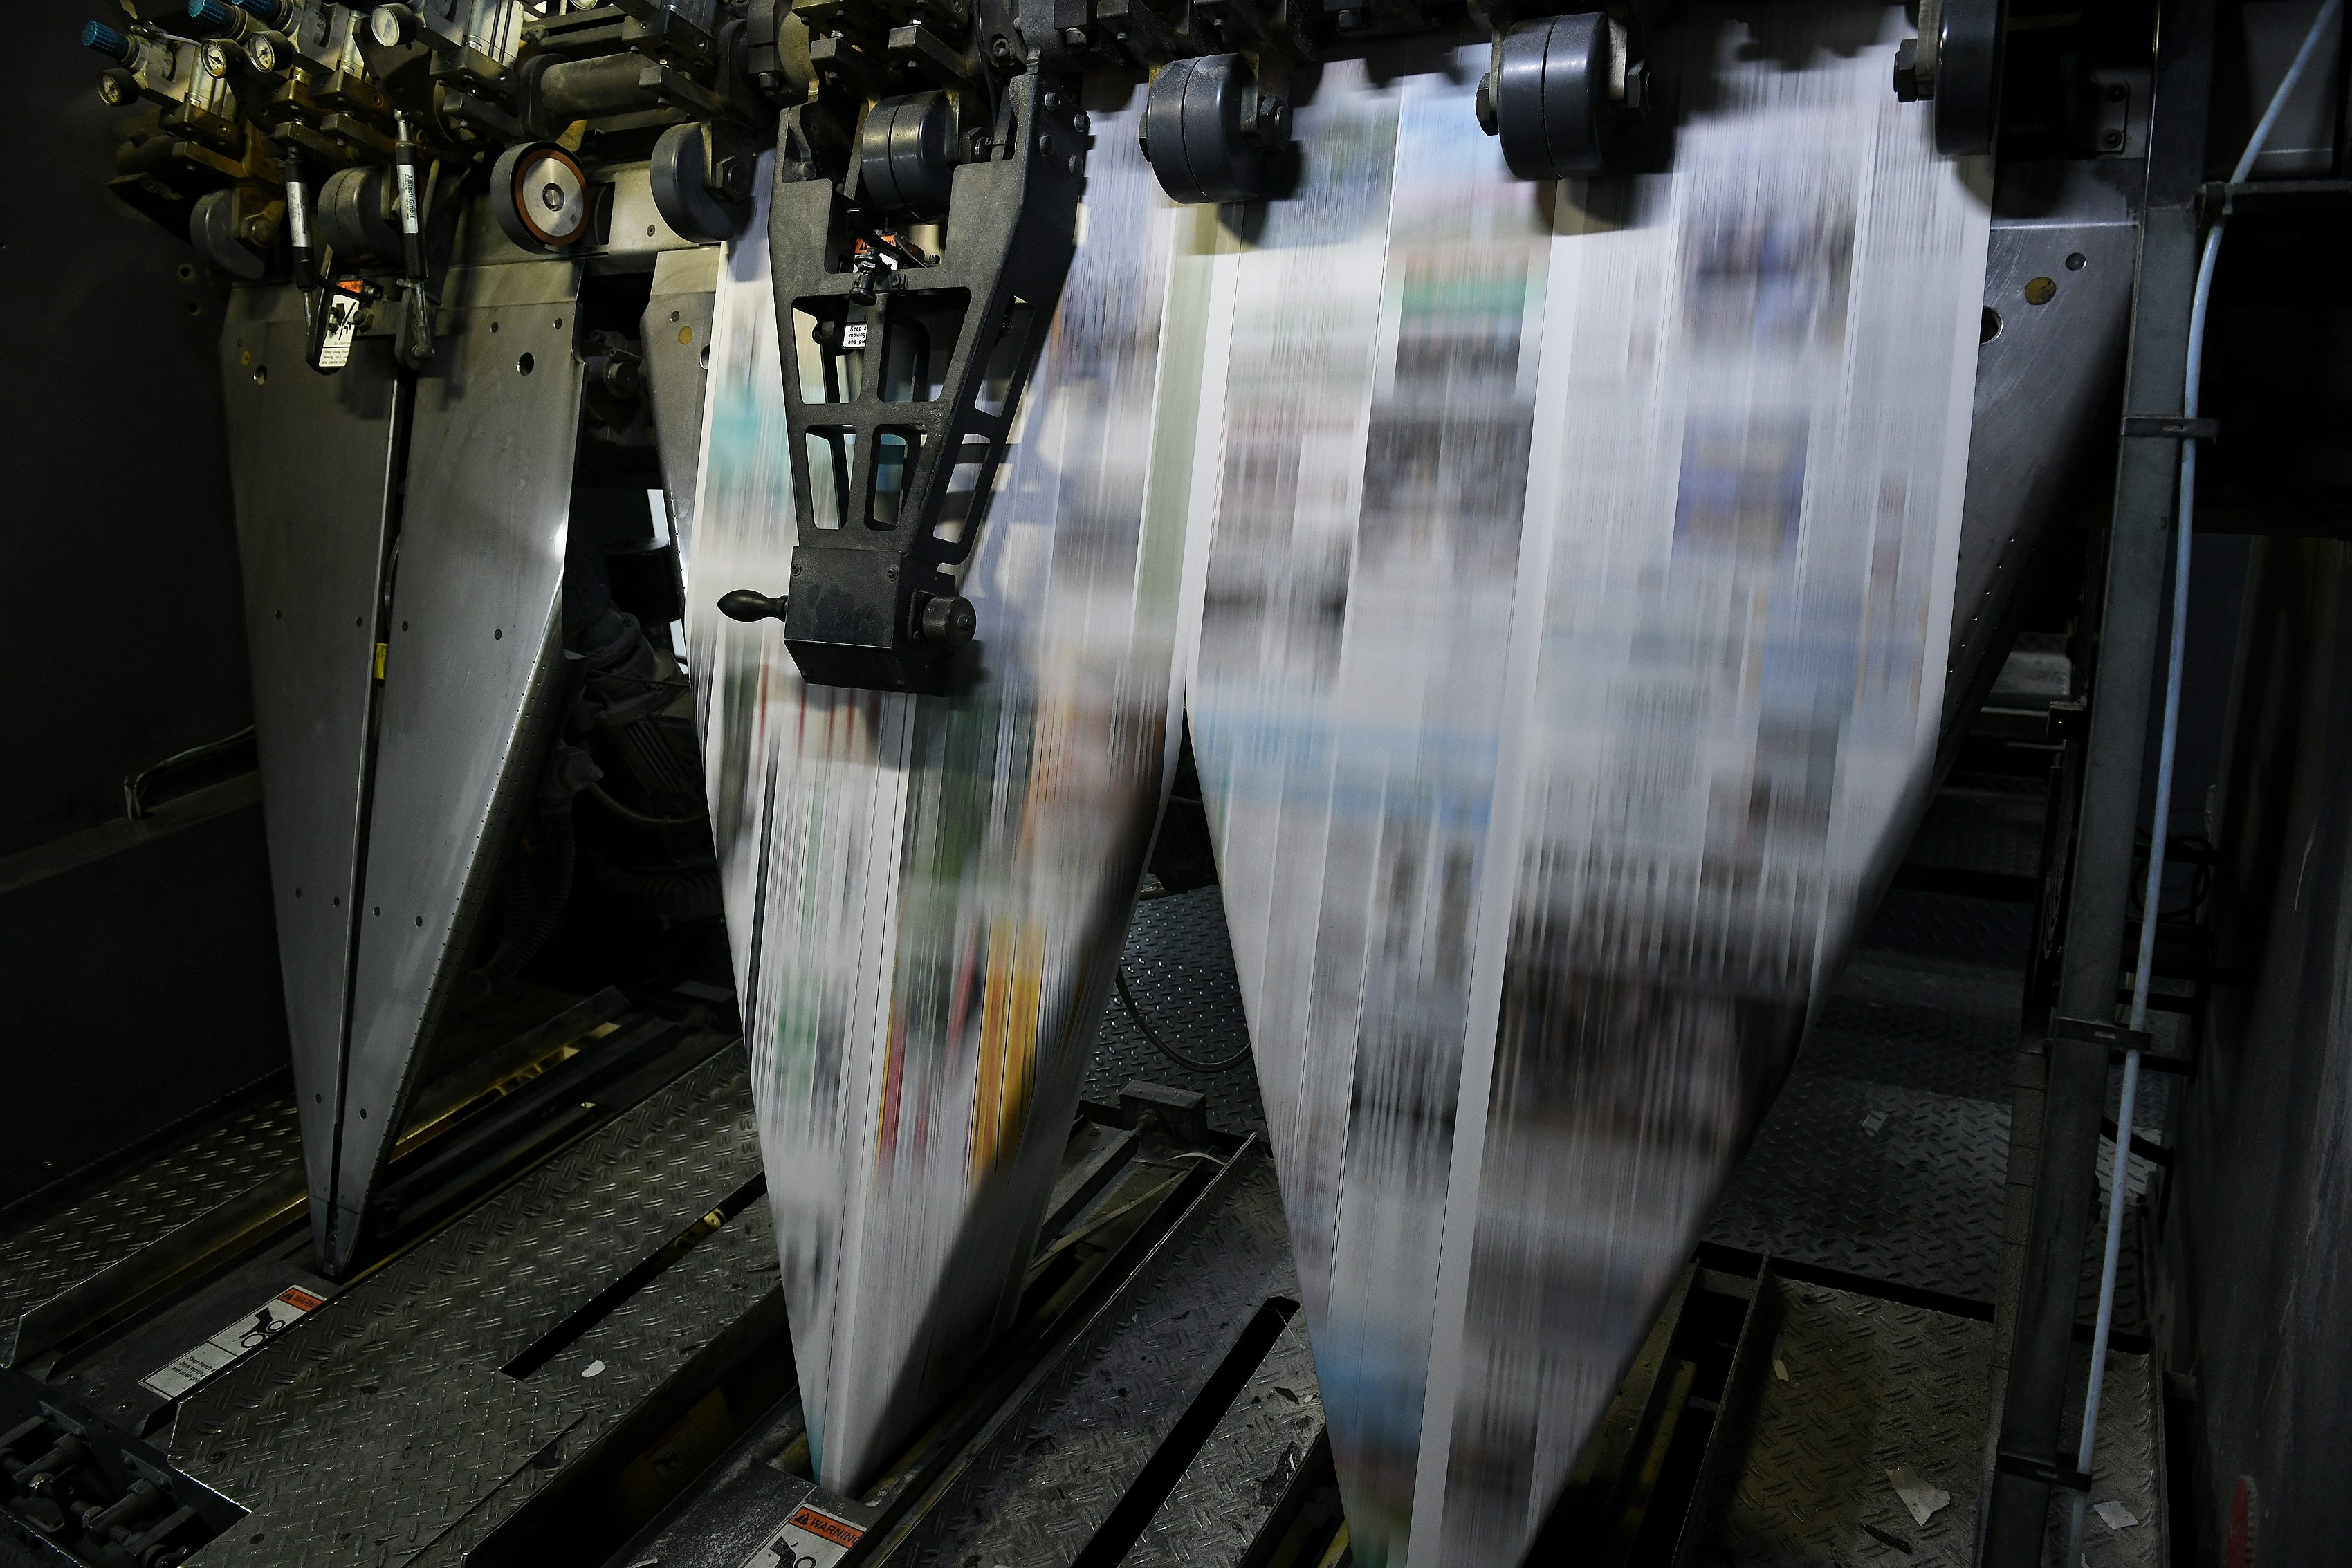 The Detroit News is printed and folded on No. 4 press at the Detroit Media Partnership Operations Facility in Sterling Heights.